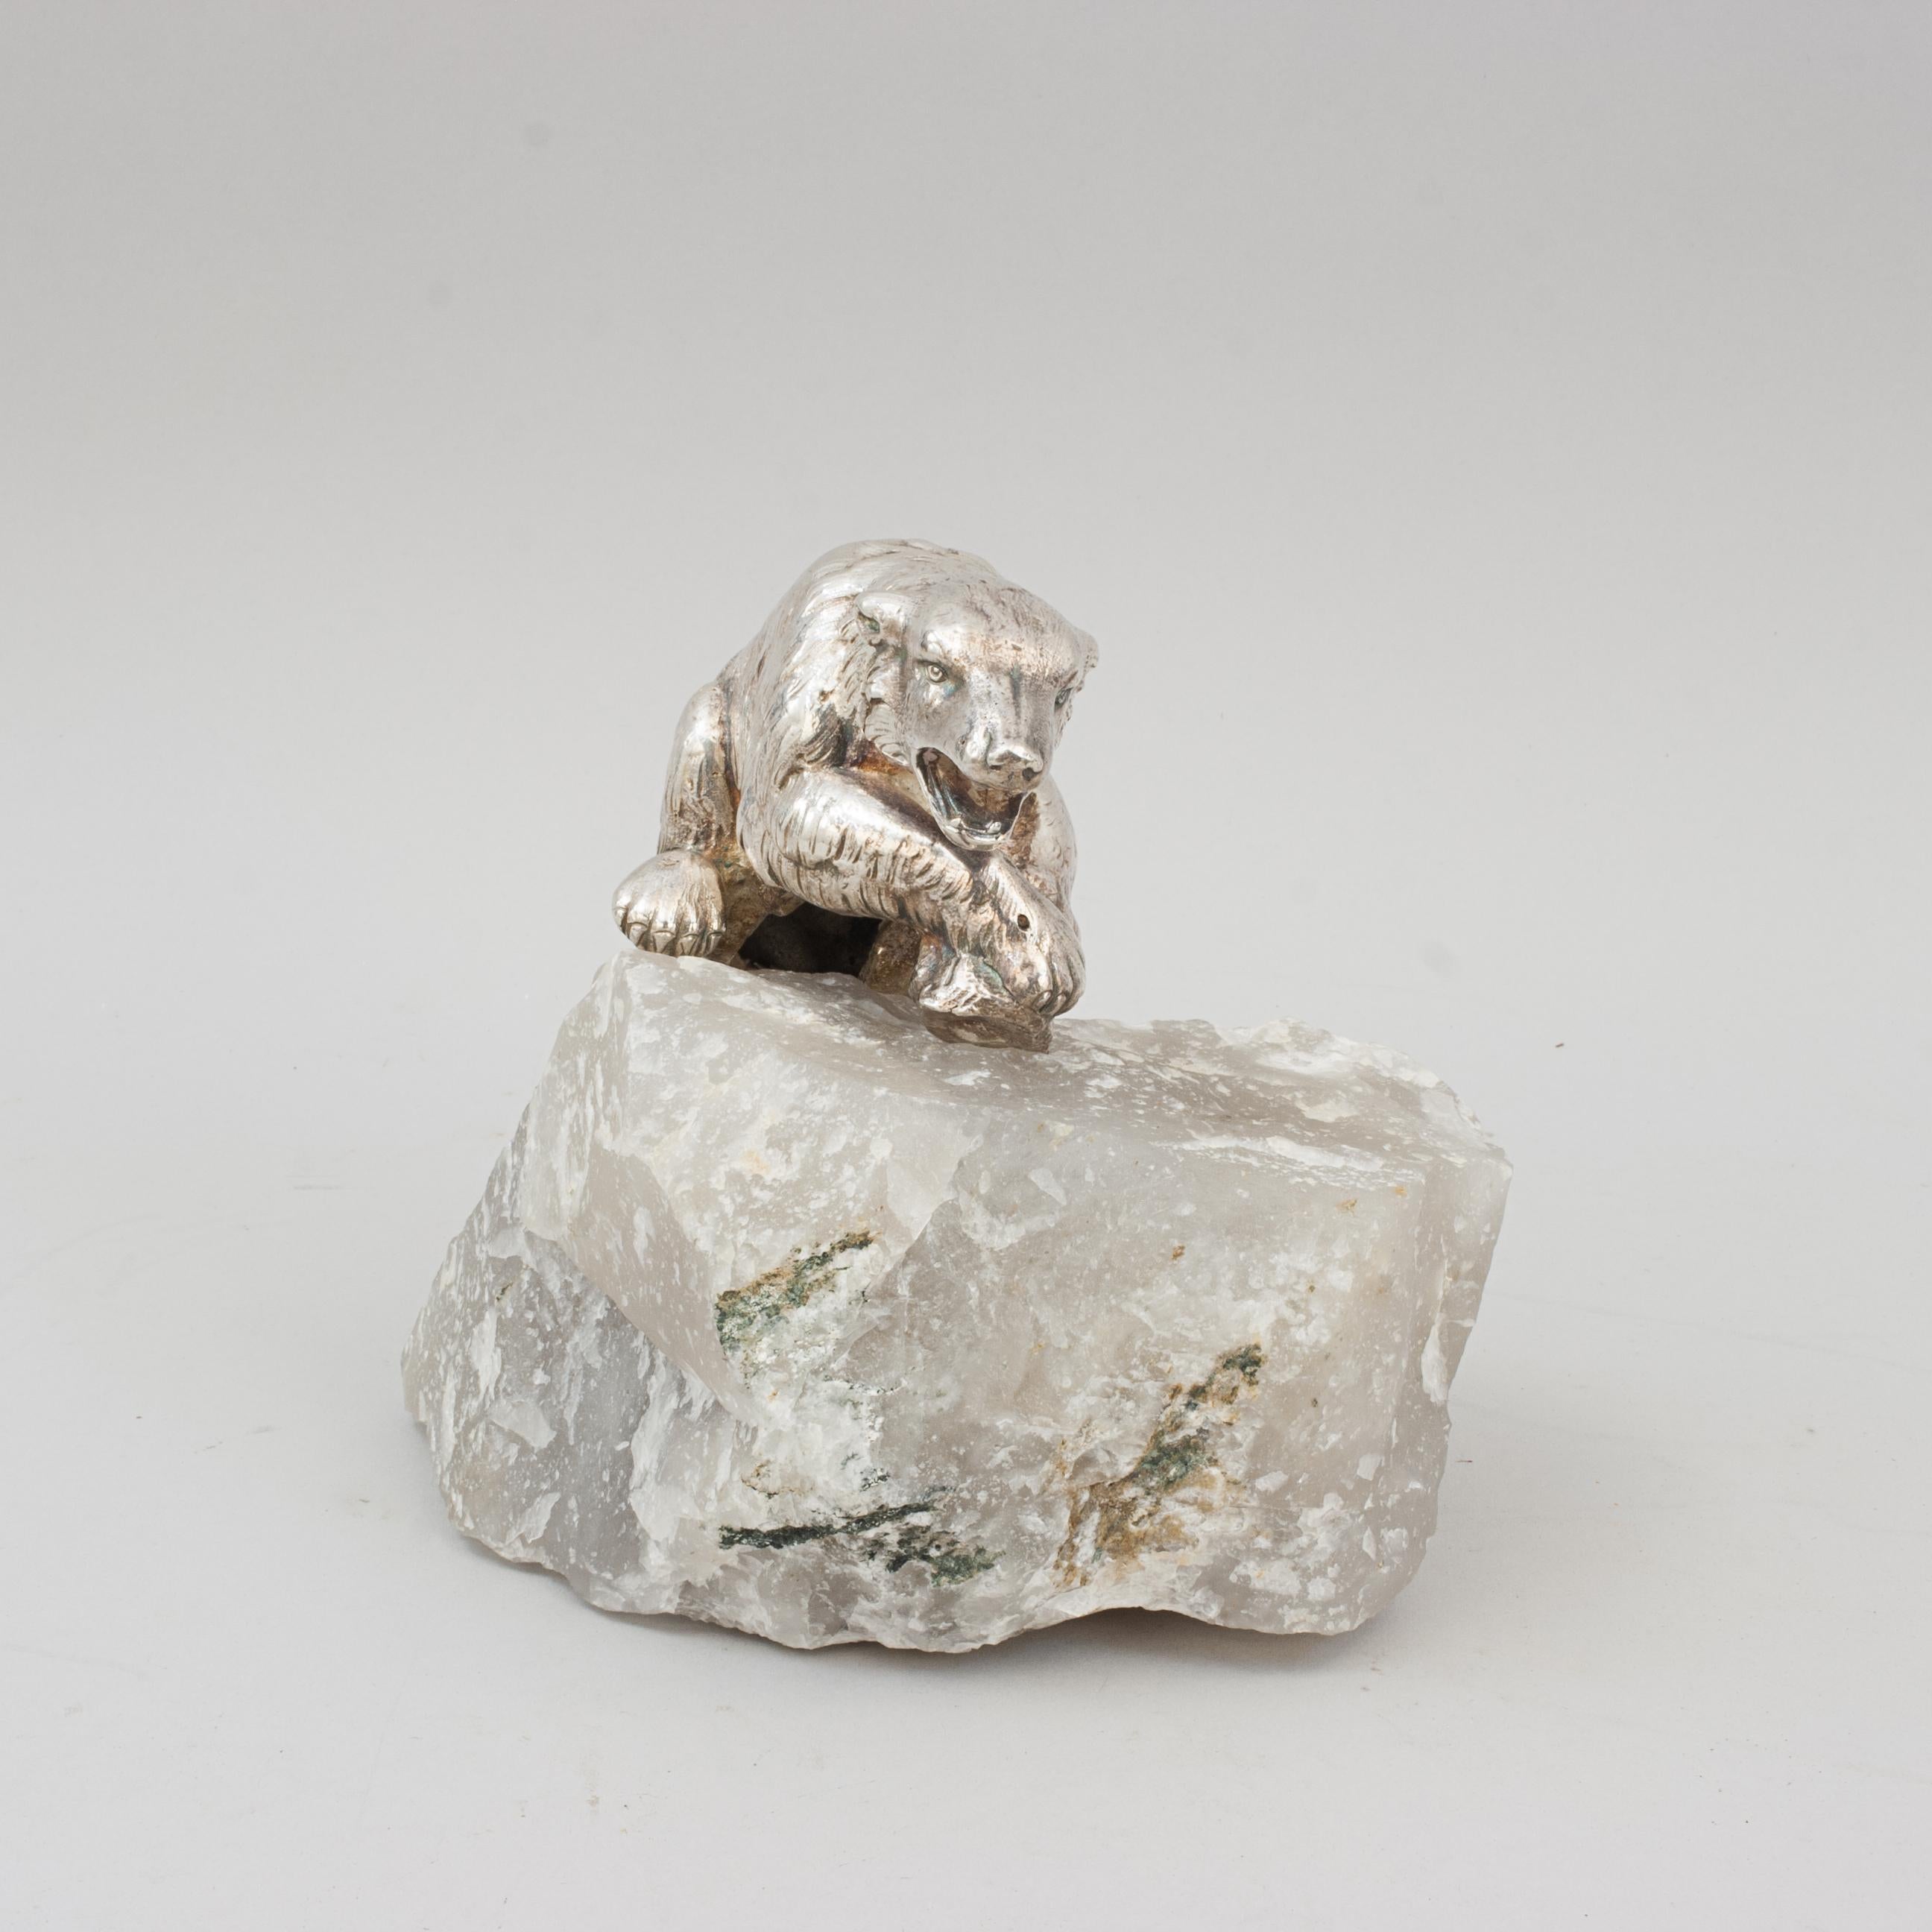 Vintage Polar Bear Sculpture.
An arctic sculpture of a polar bear on an iceberg. The polar bear is well made, silver plated and the iceberg is made of quartz. The study of the polar bear is modelled climbing onto the ice, ears back and mouth